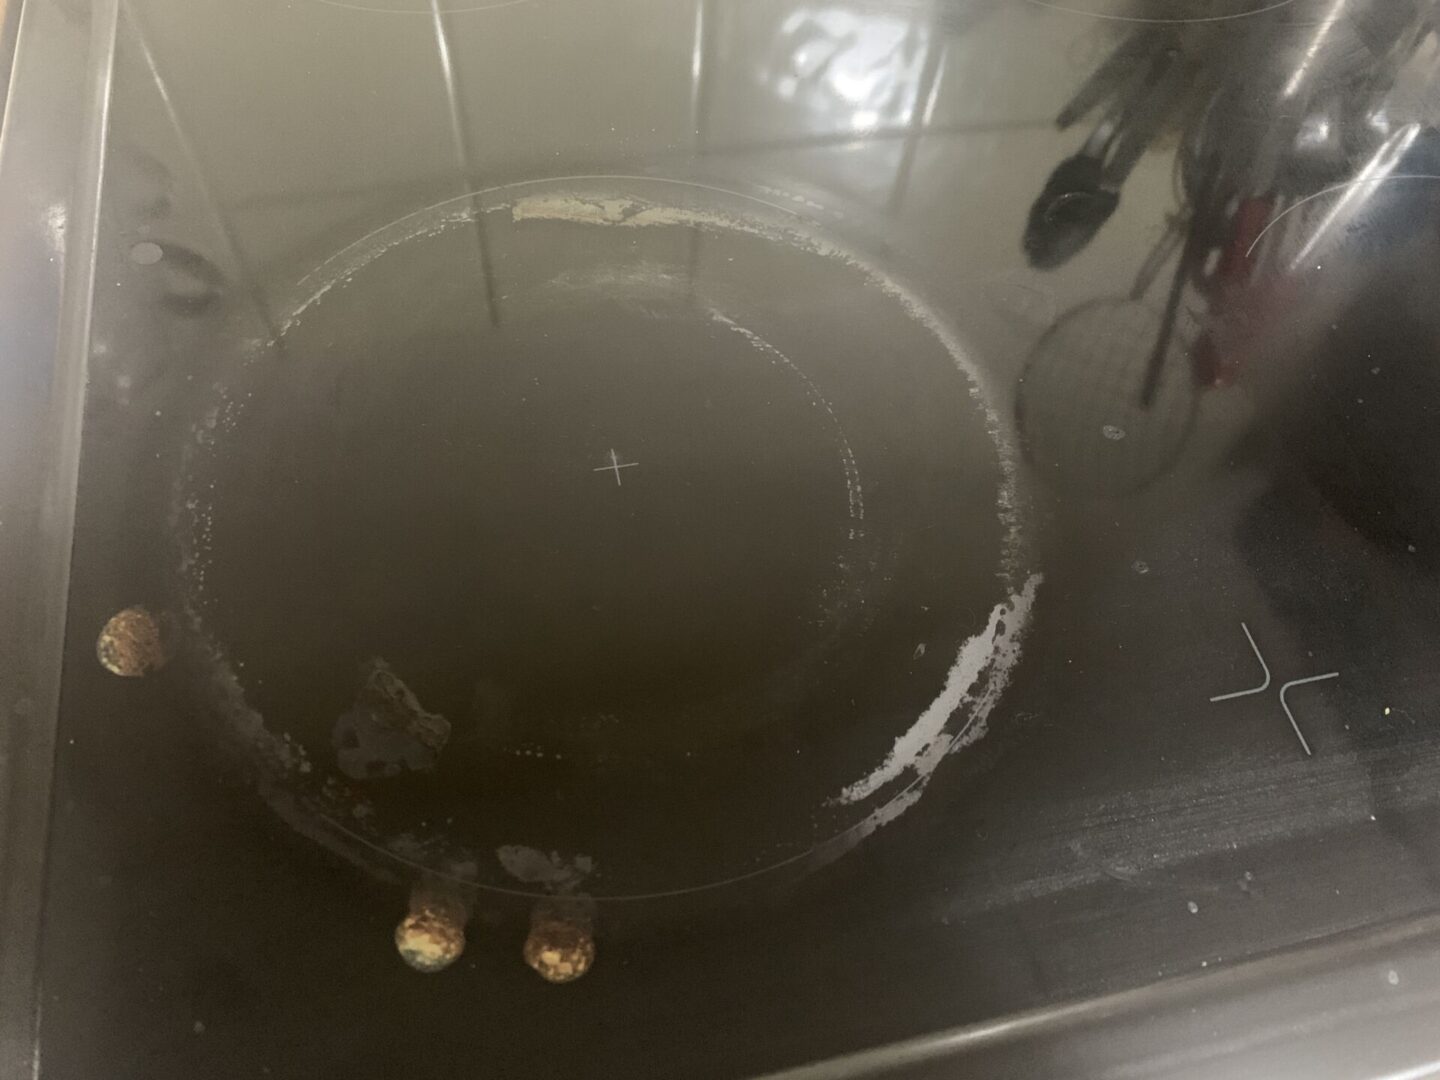 ceramic hob with burnt on stains
how to clean a ceramic hob
how to remove burnt on food on oven or hob
